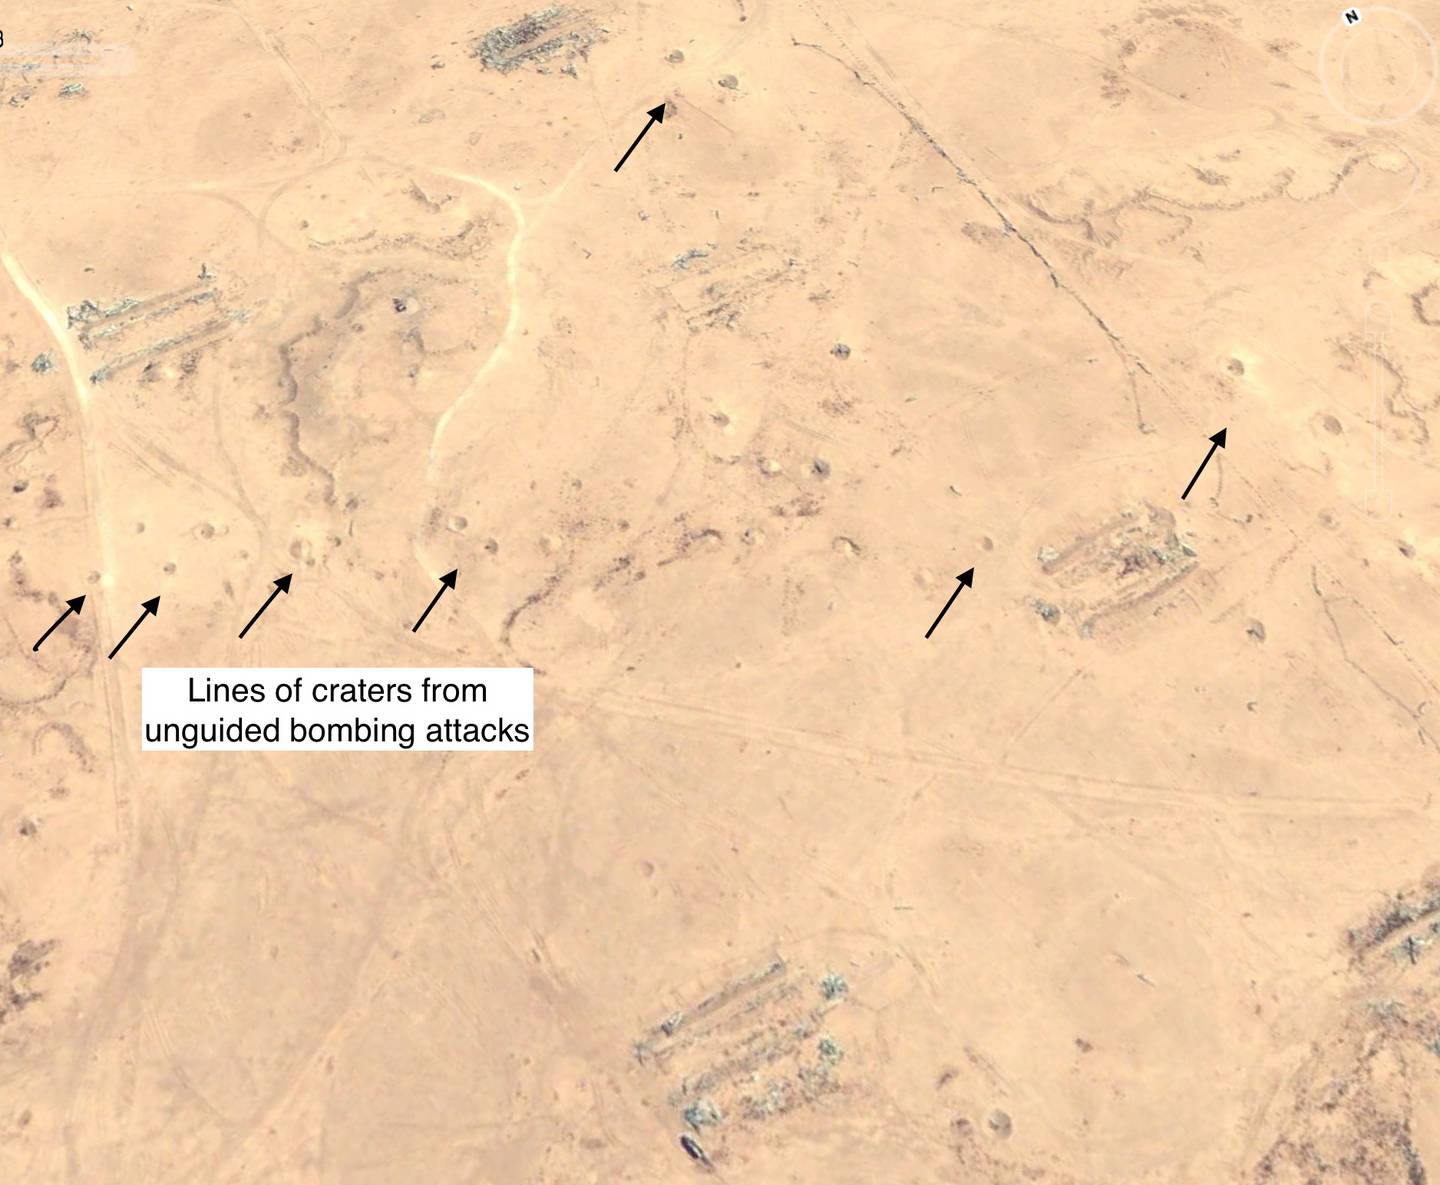 This August 2003 satellite photo shows lines of craters from unguided bombs at Iraq's Al Muhammadiyat chemical weapon storage facility, which was attacked in 1991 with 1,200 laser-guided and unguided bombs, destroying 40 warehouses and numerous bunkers. Google Earth.